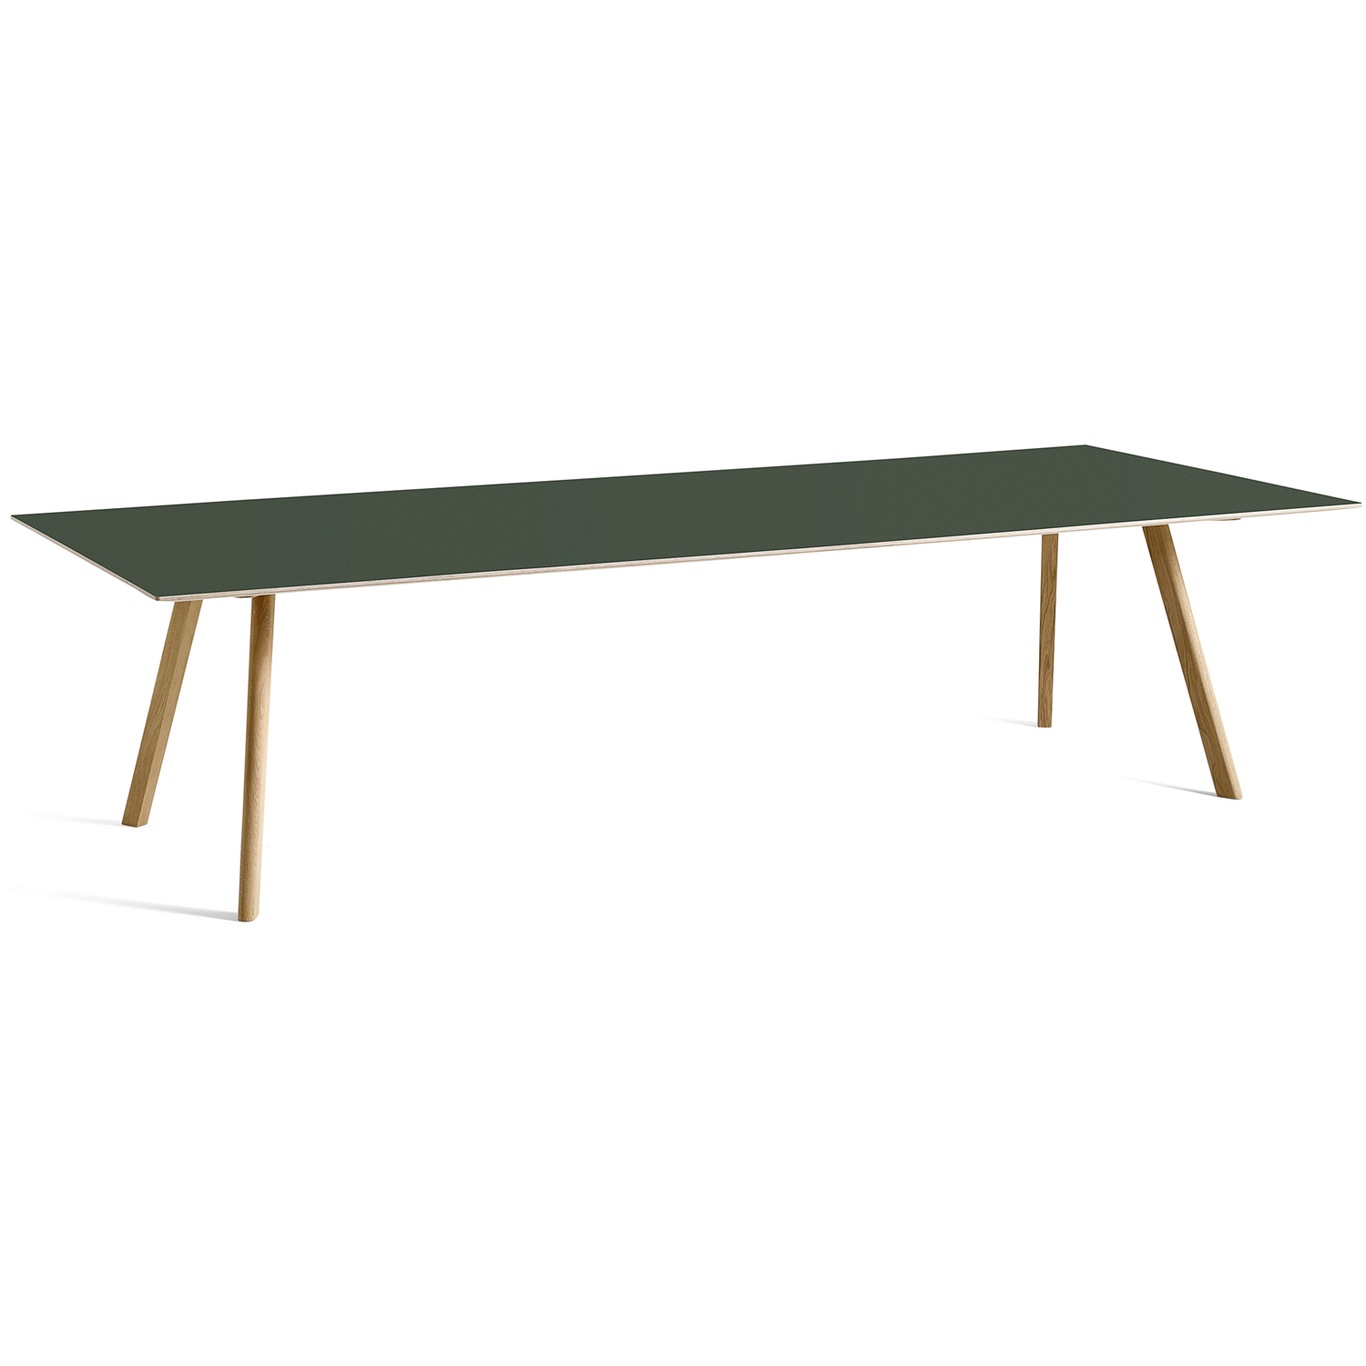 CPH 30 Table 300x120 cm, Water-based Lacquered Oak / Green Linoleum